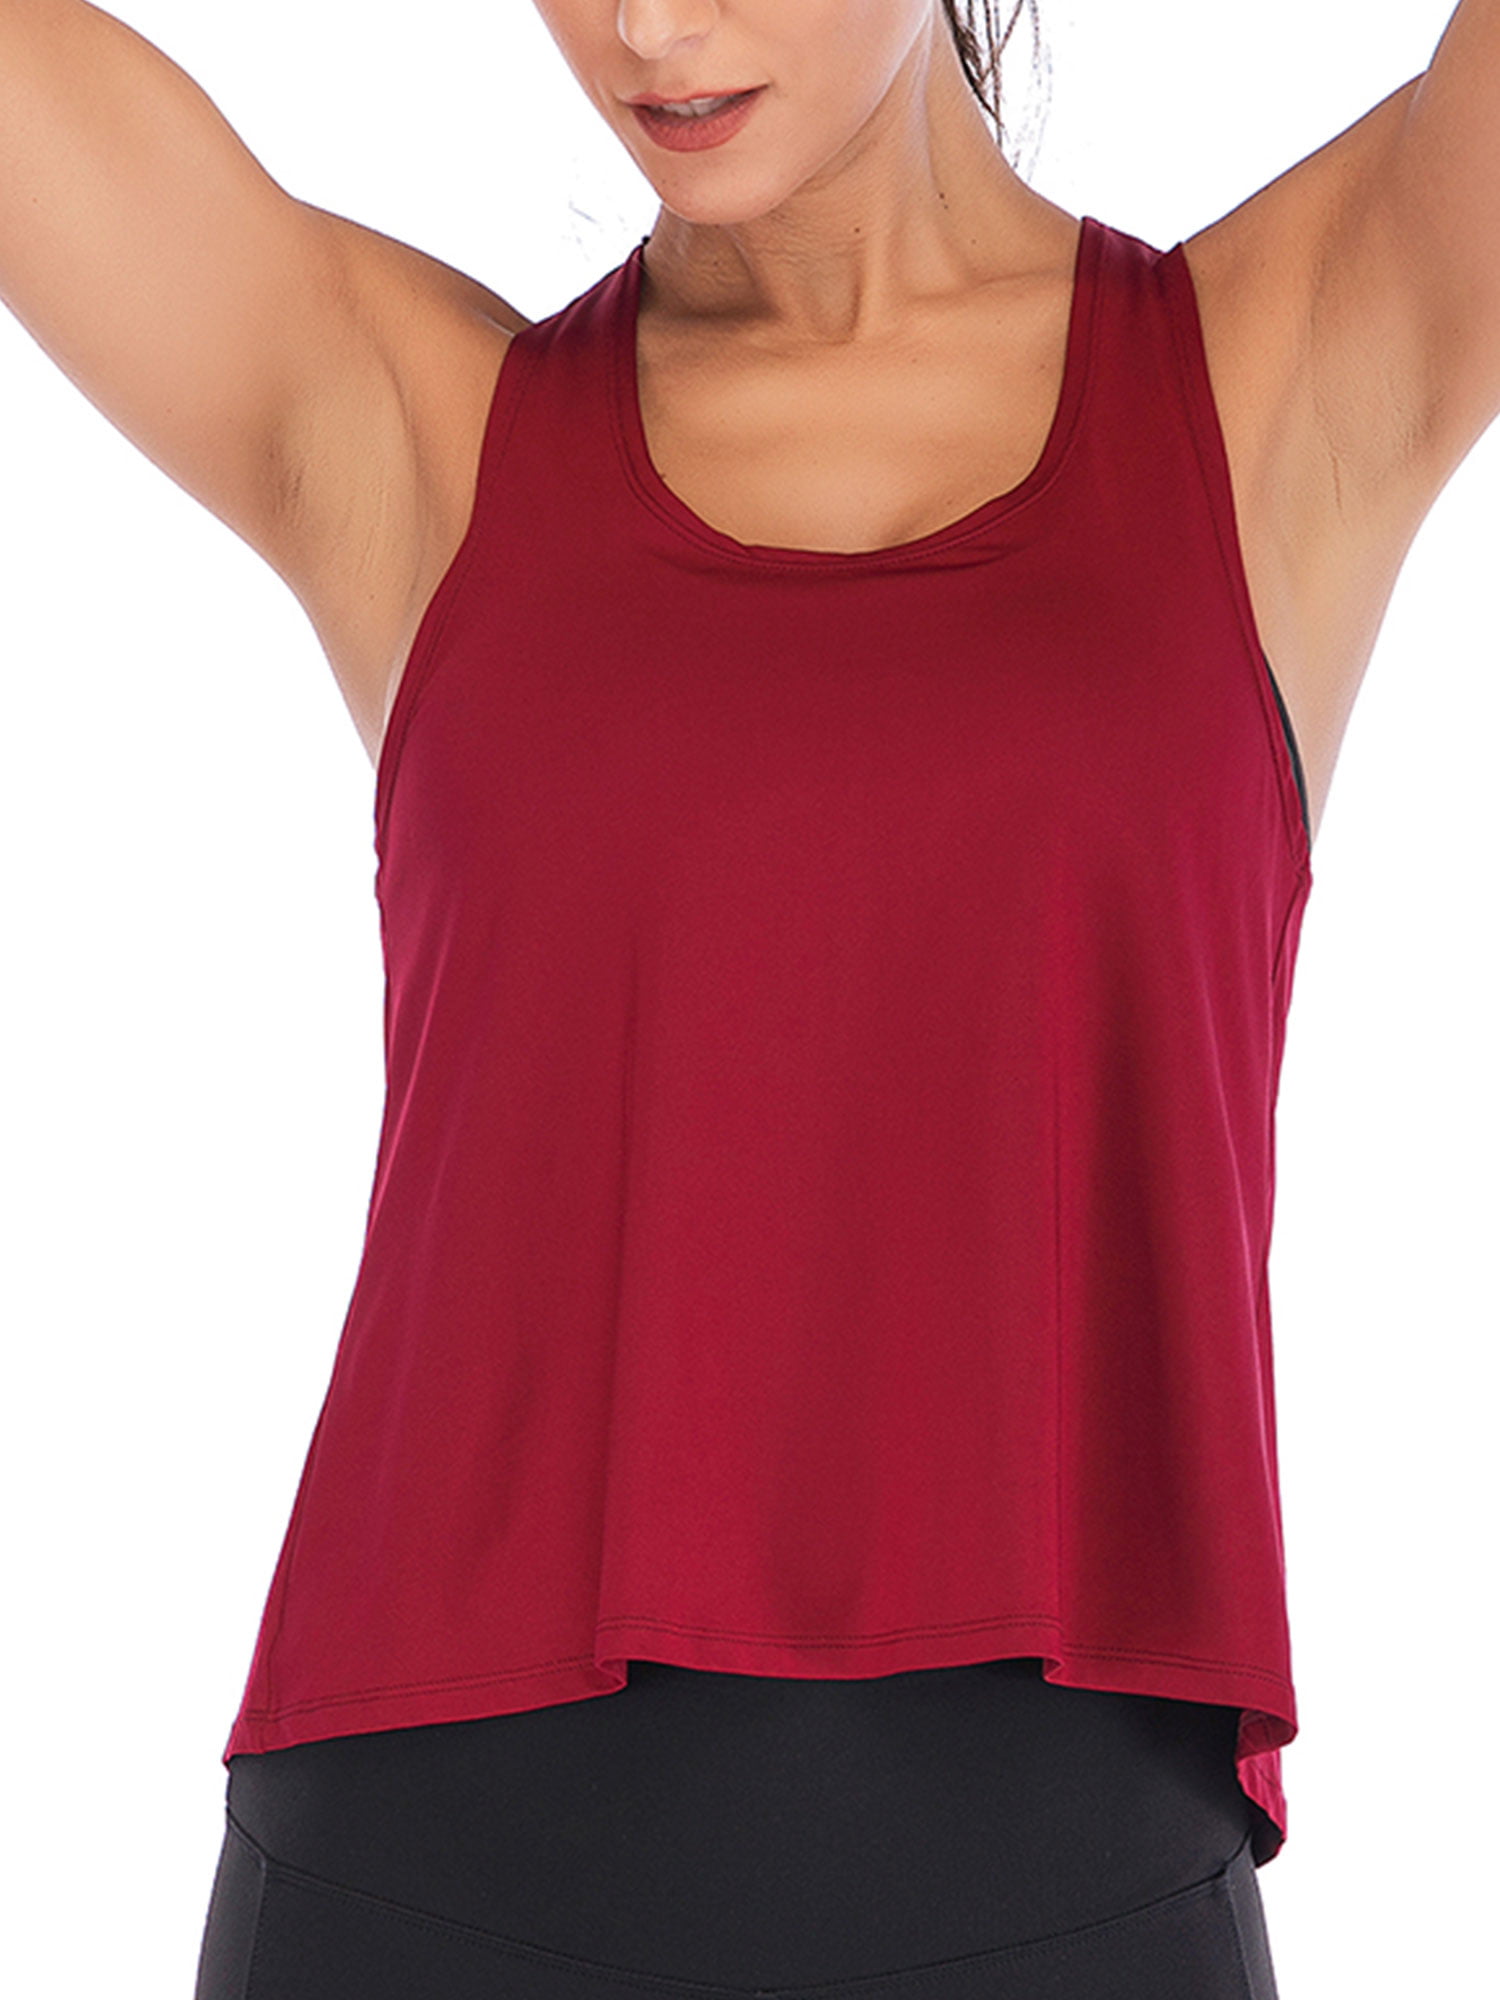 Featurestop Tank Tops for Women Loose Casual Workout Trim Tunic Vest 